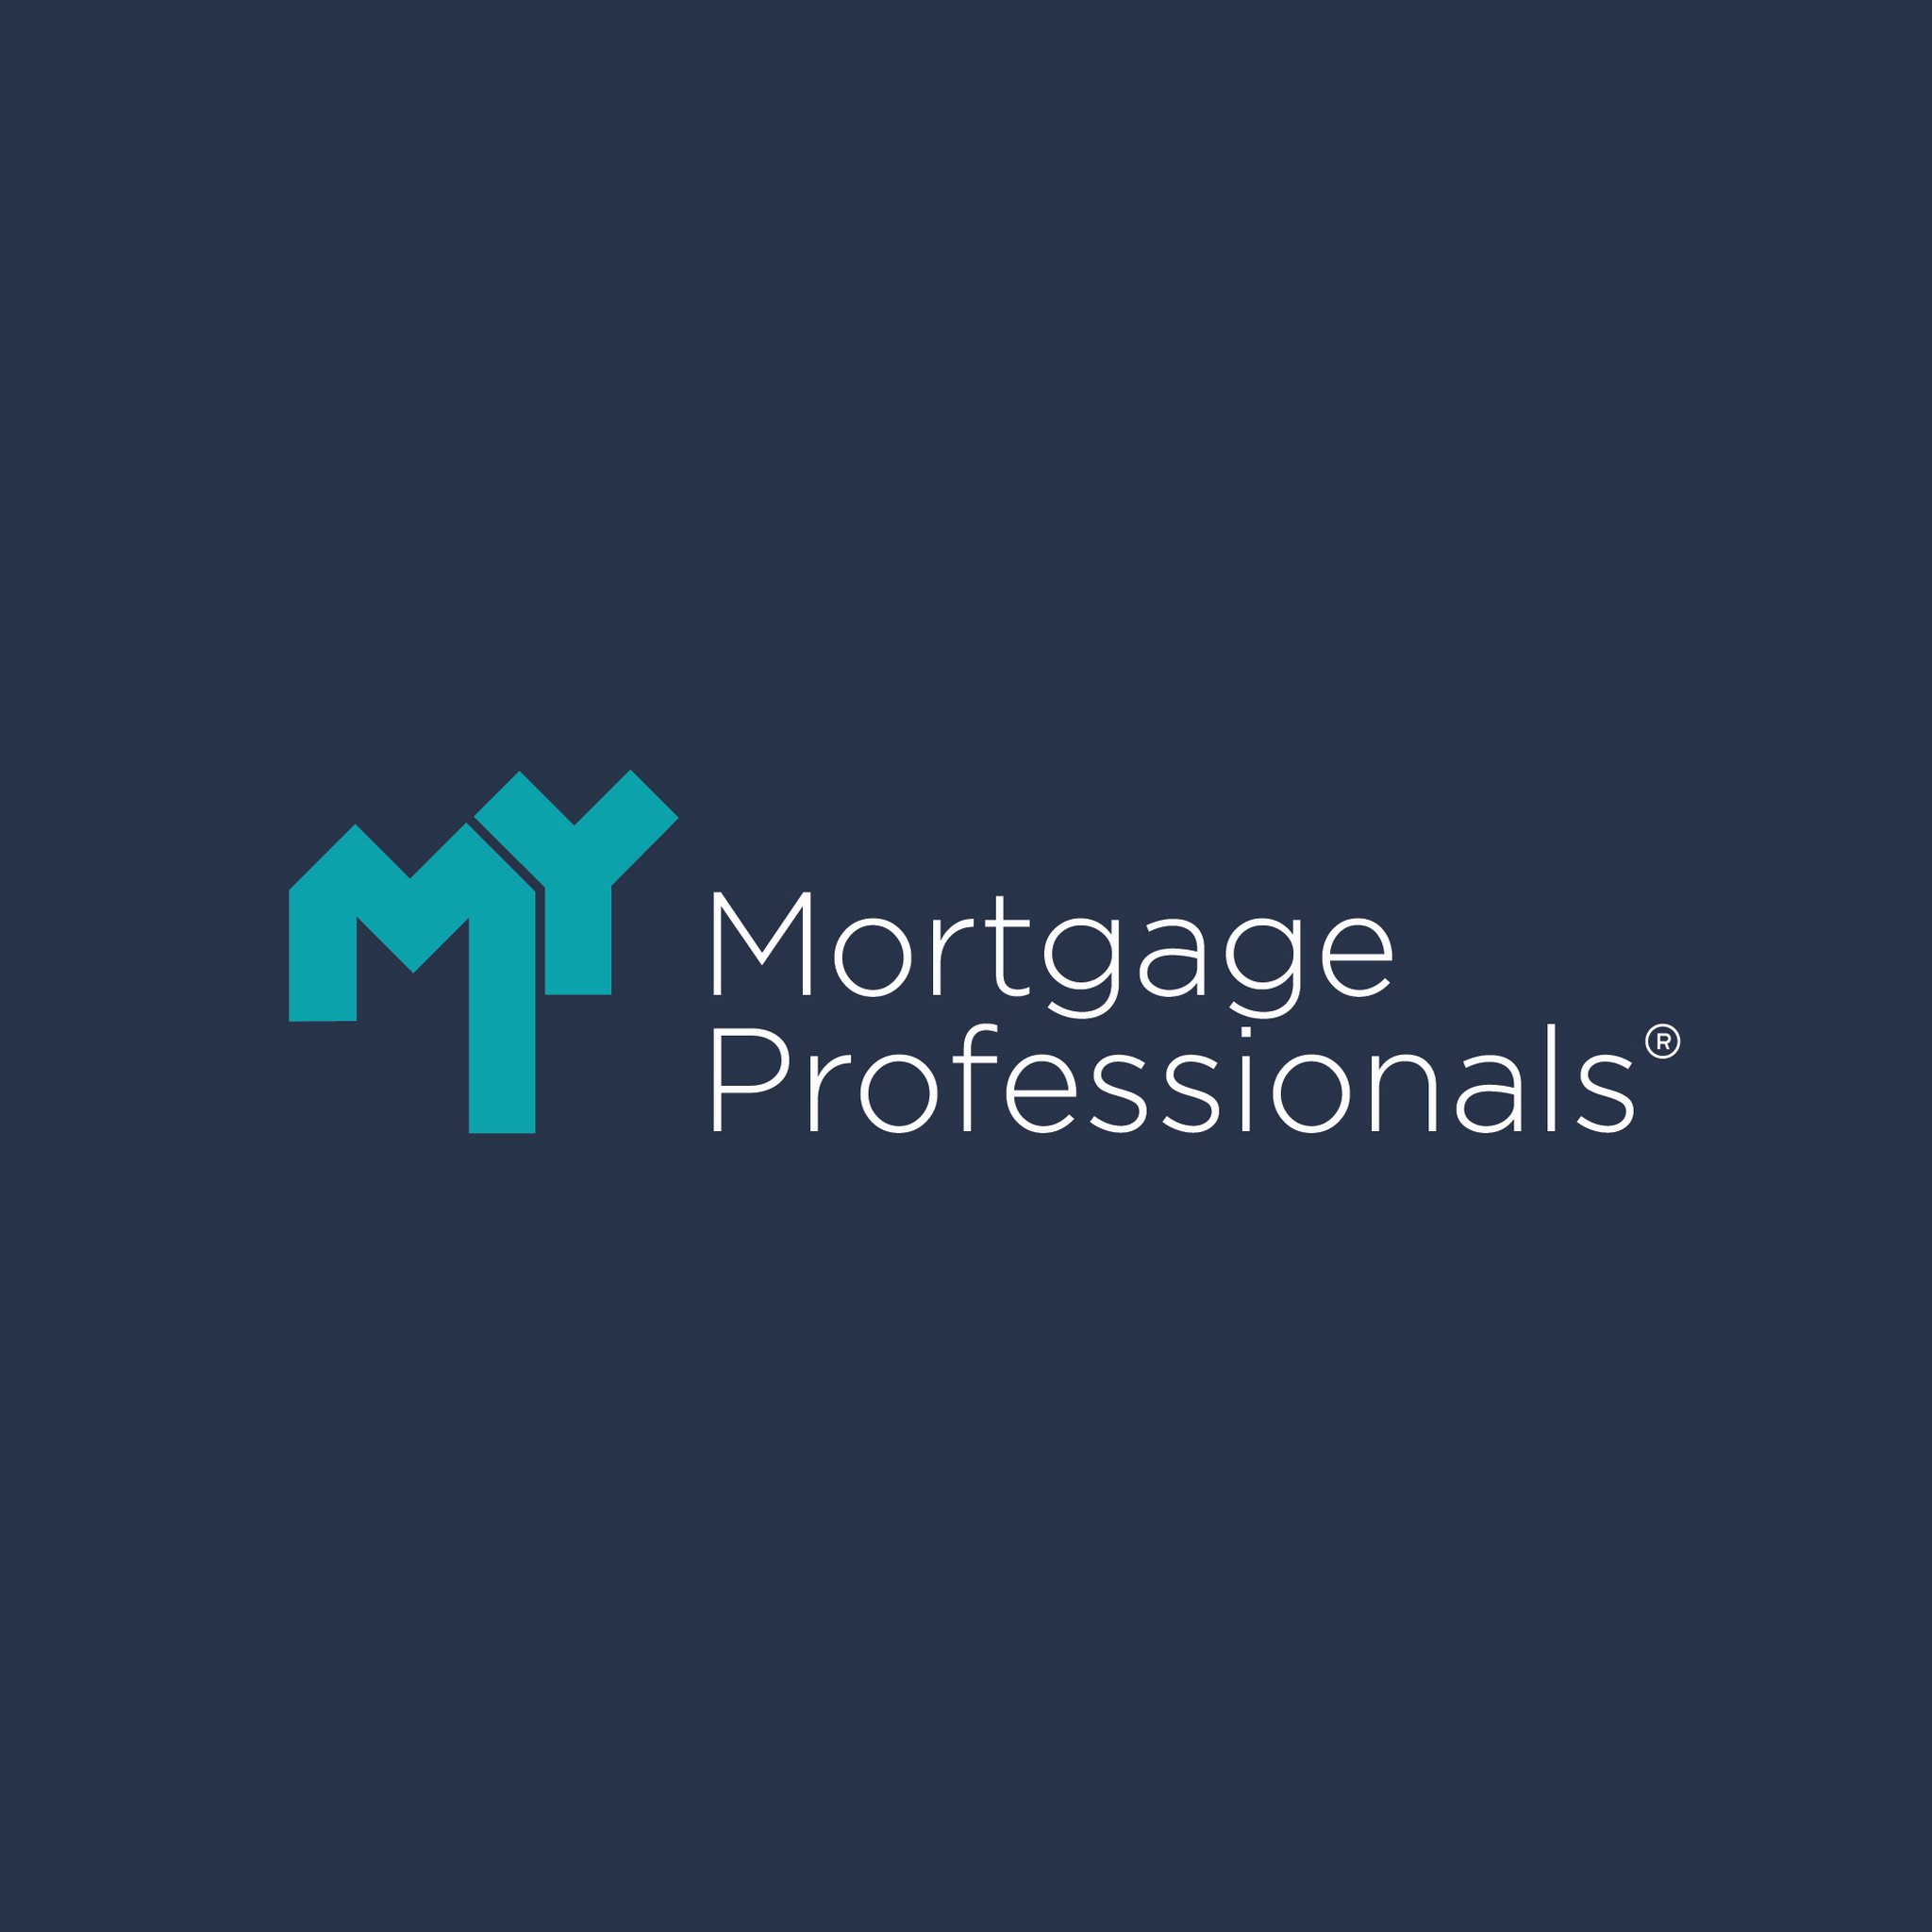 Images My Mortgage Professionals